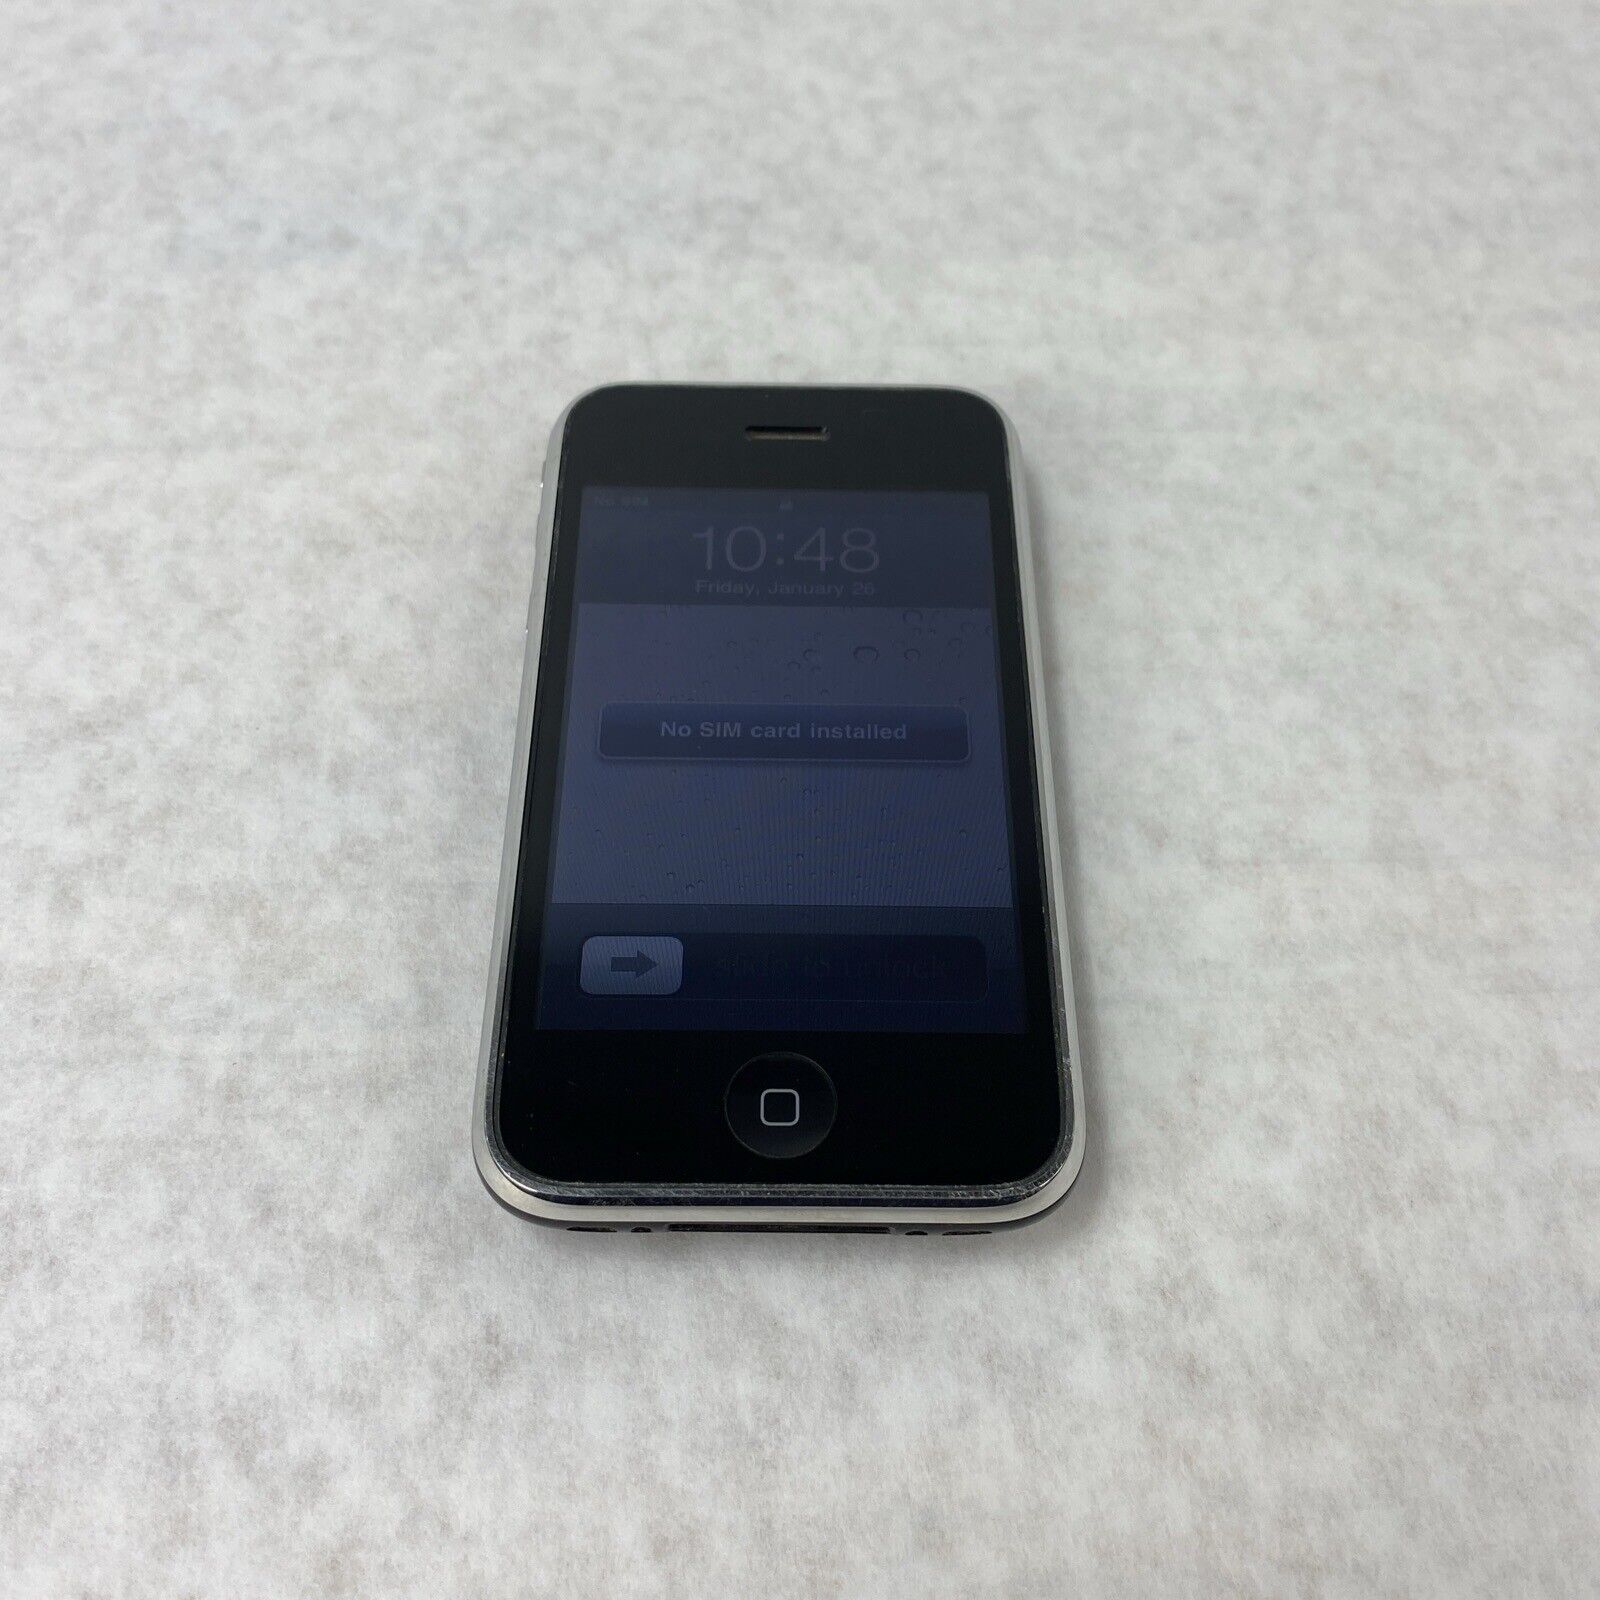 Apple iPhone 3G A1241 8GB Black For AT&T Carrier - Bad Mute Switch